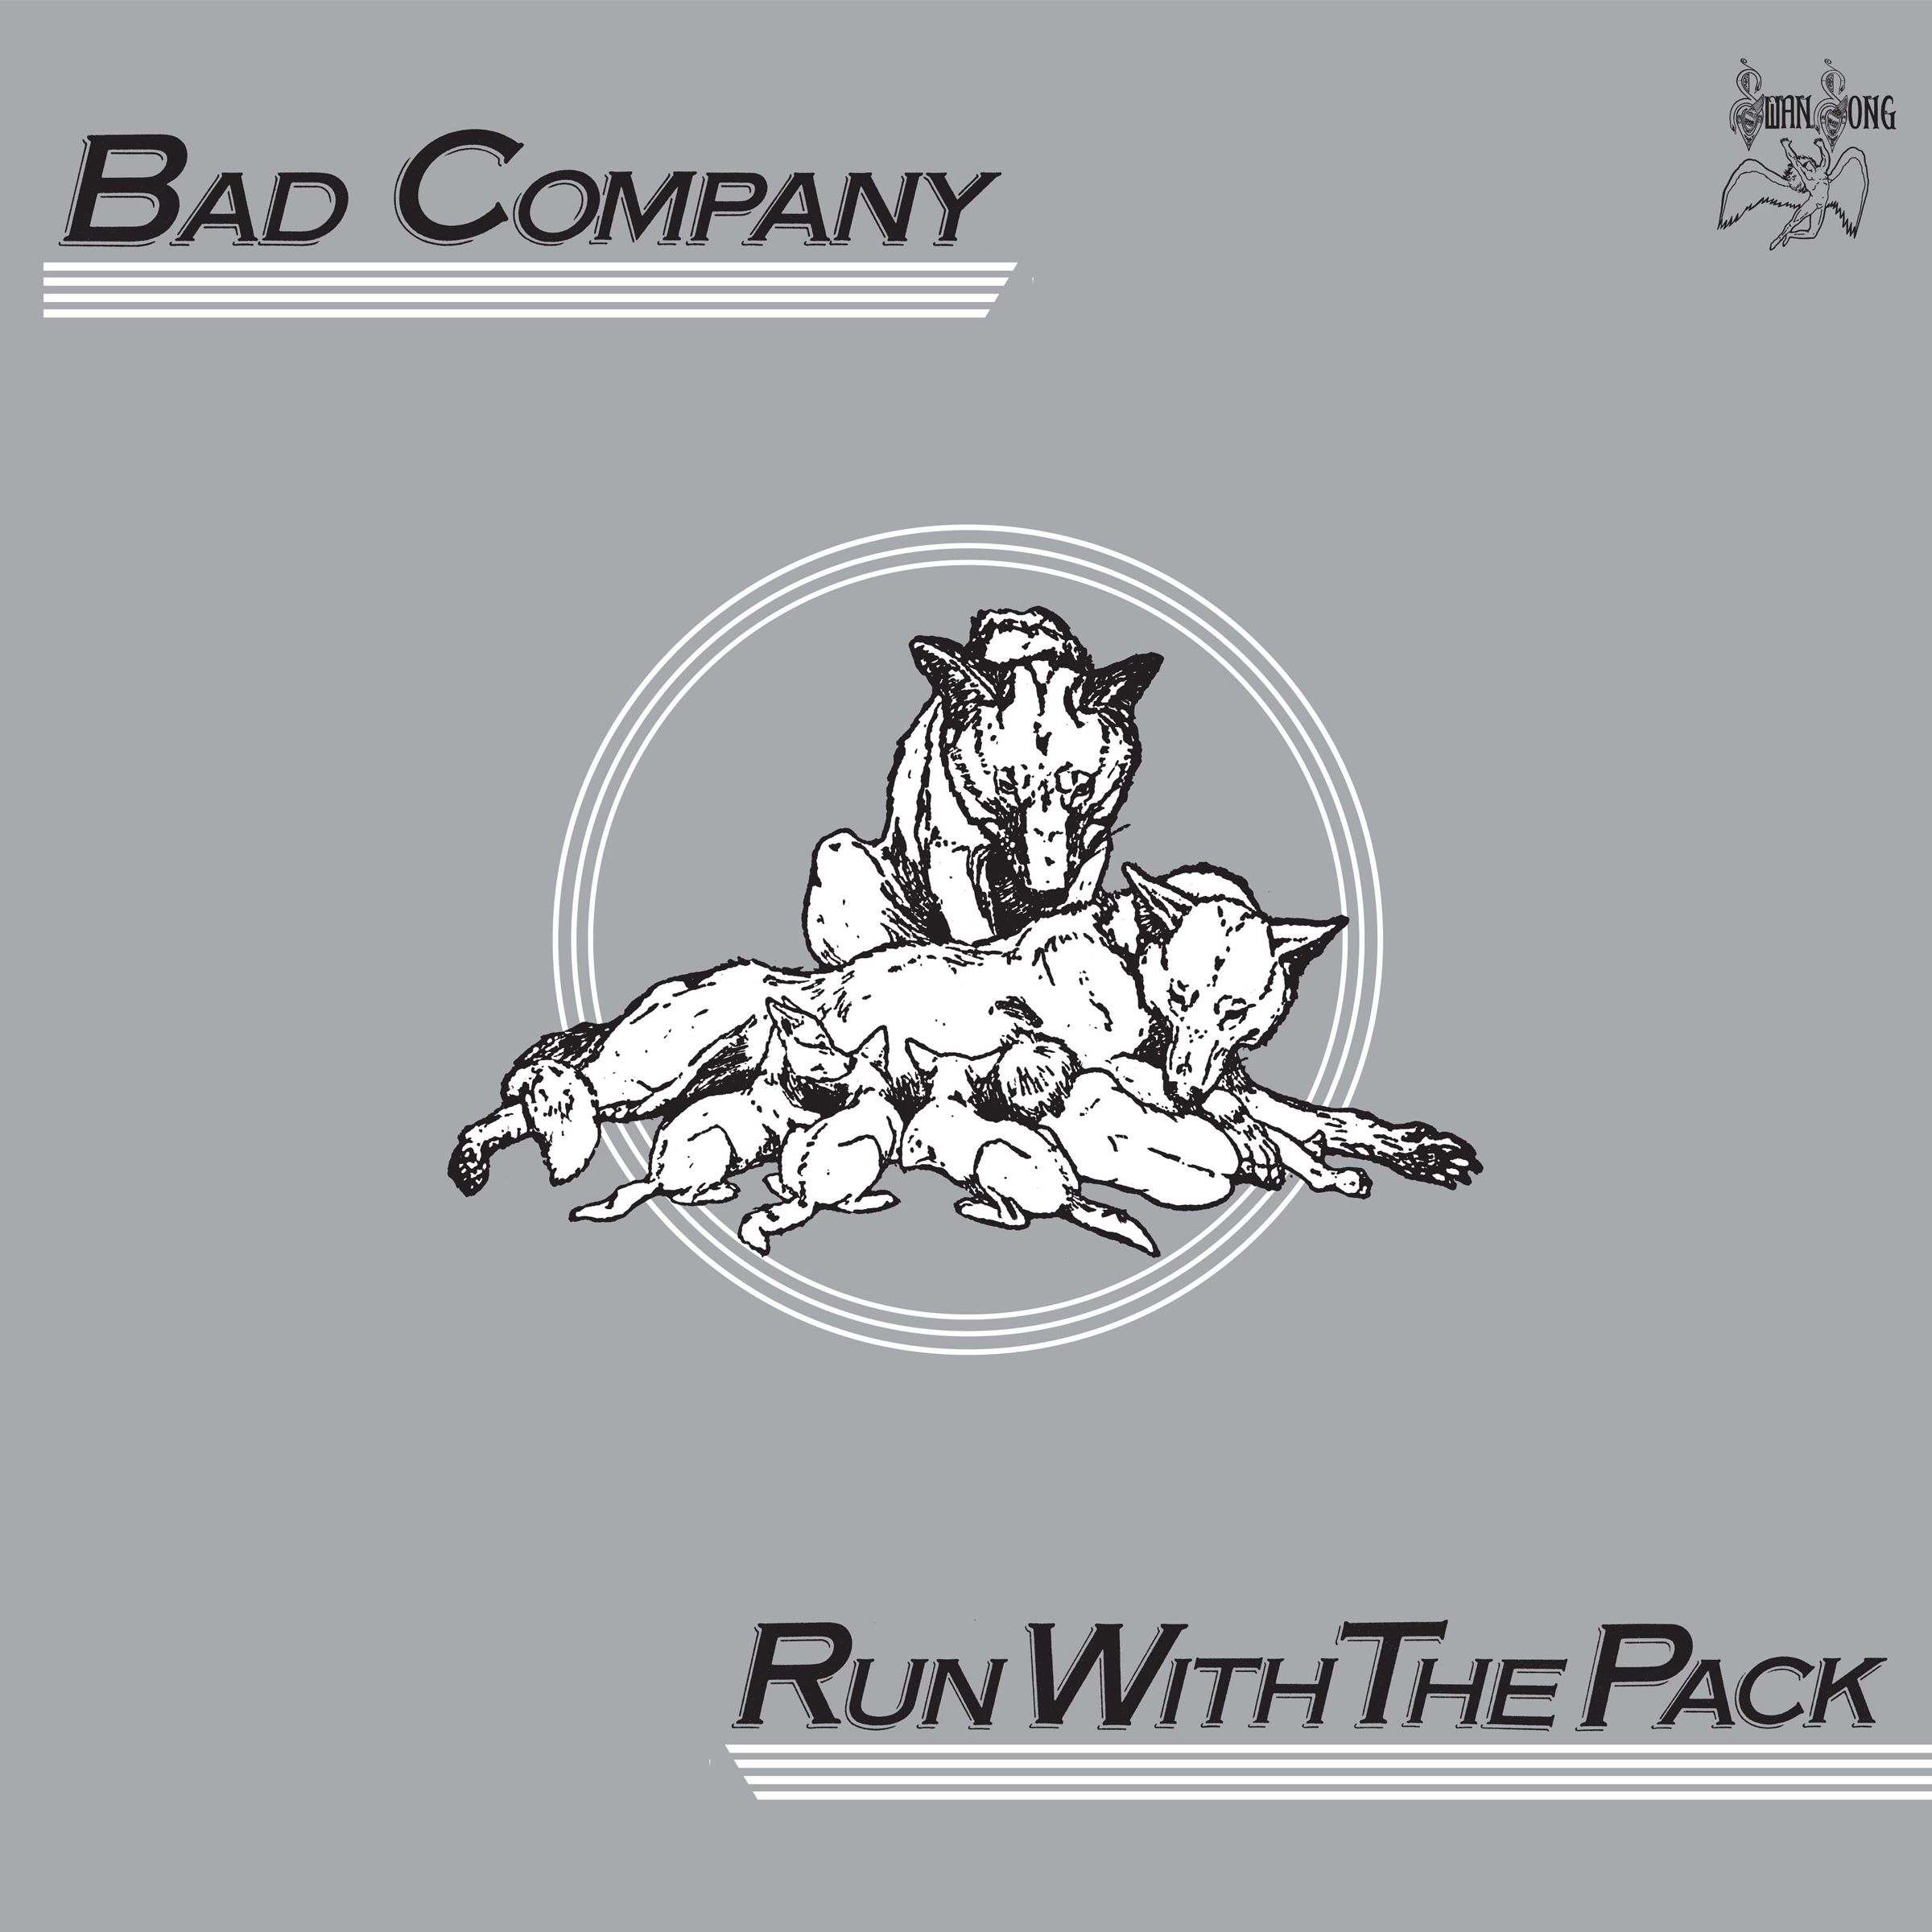 Bad Company - Run With The Pack (1976) {Deluxe Edition 2017} [HDTracks FLAC 24bit/96kHz]